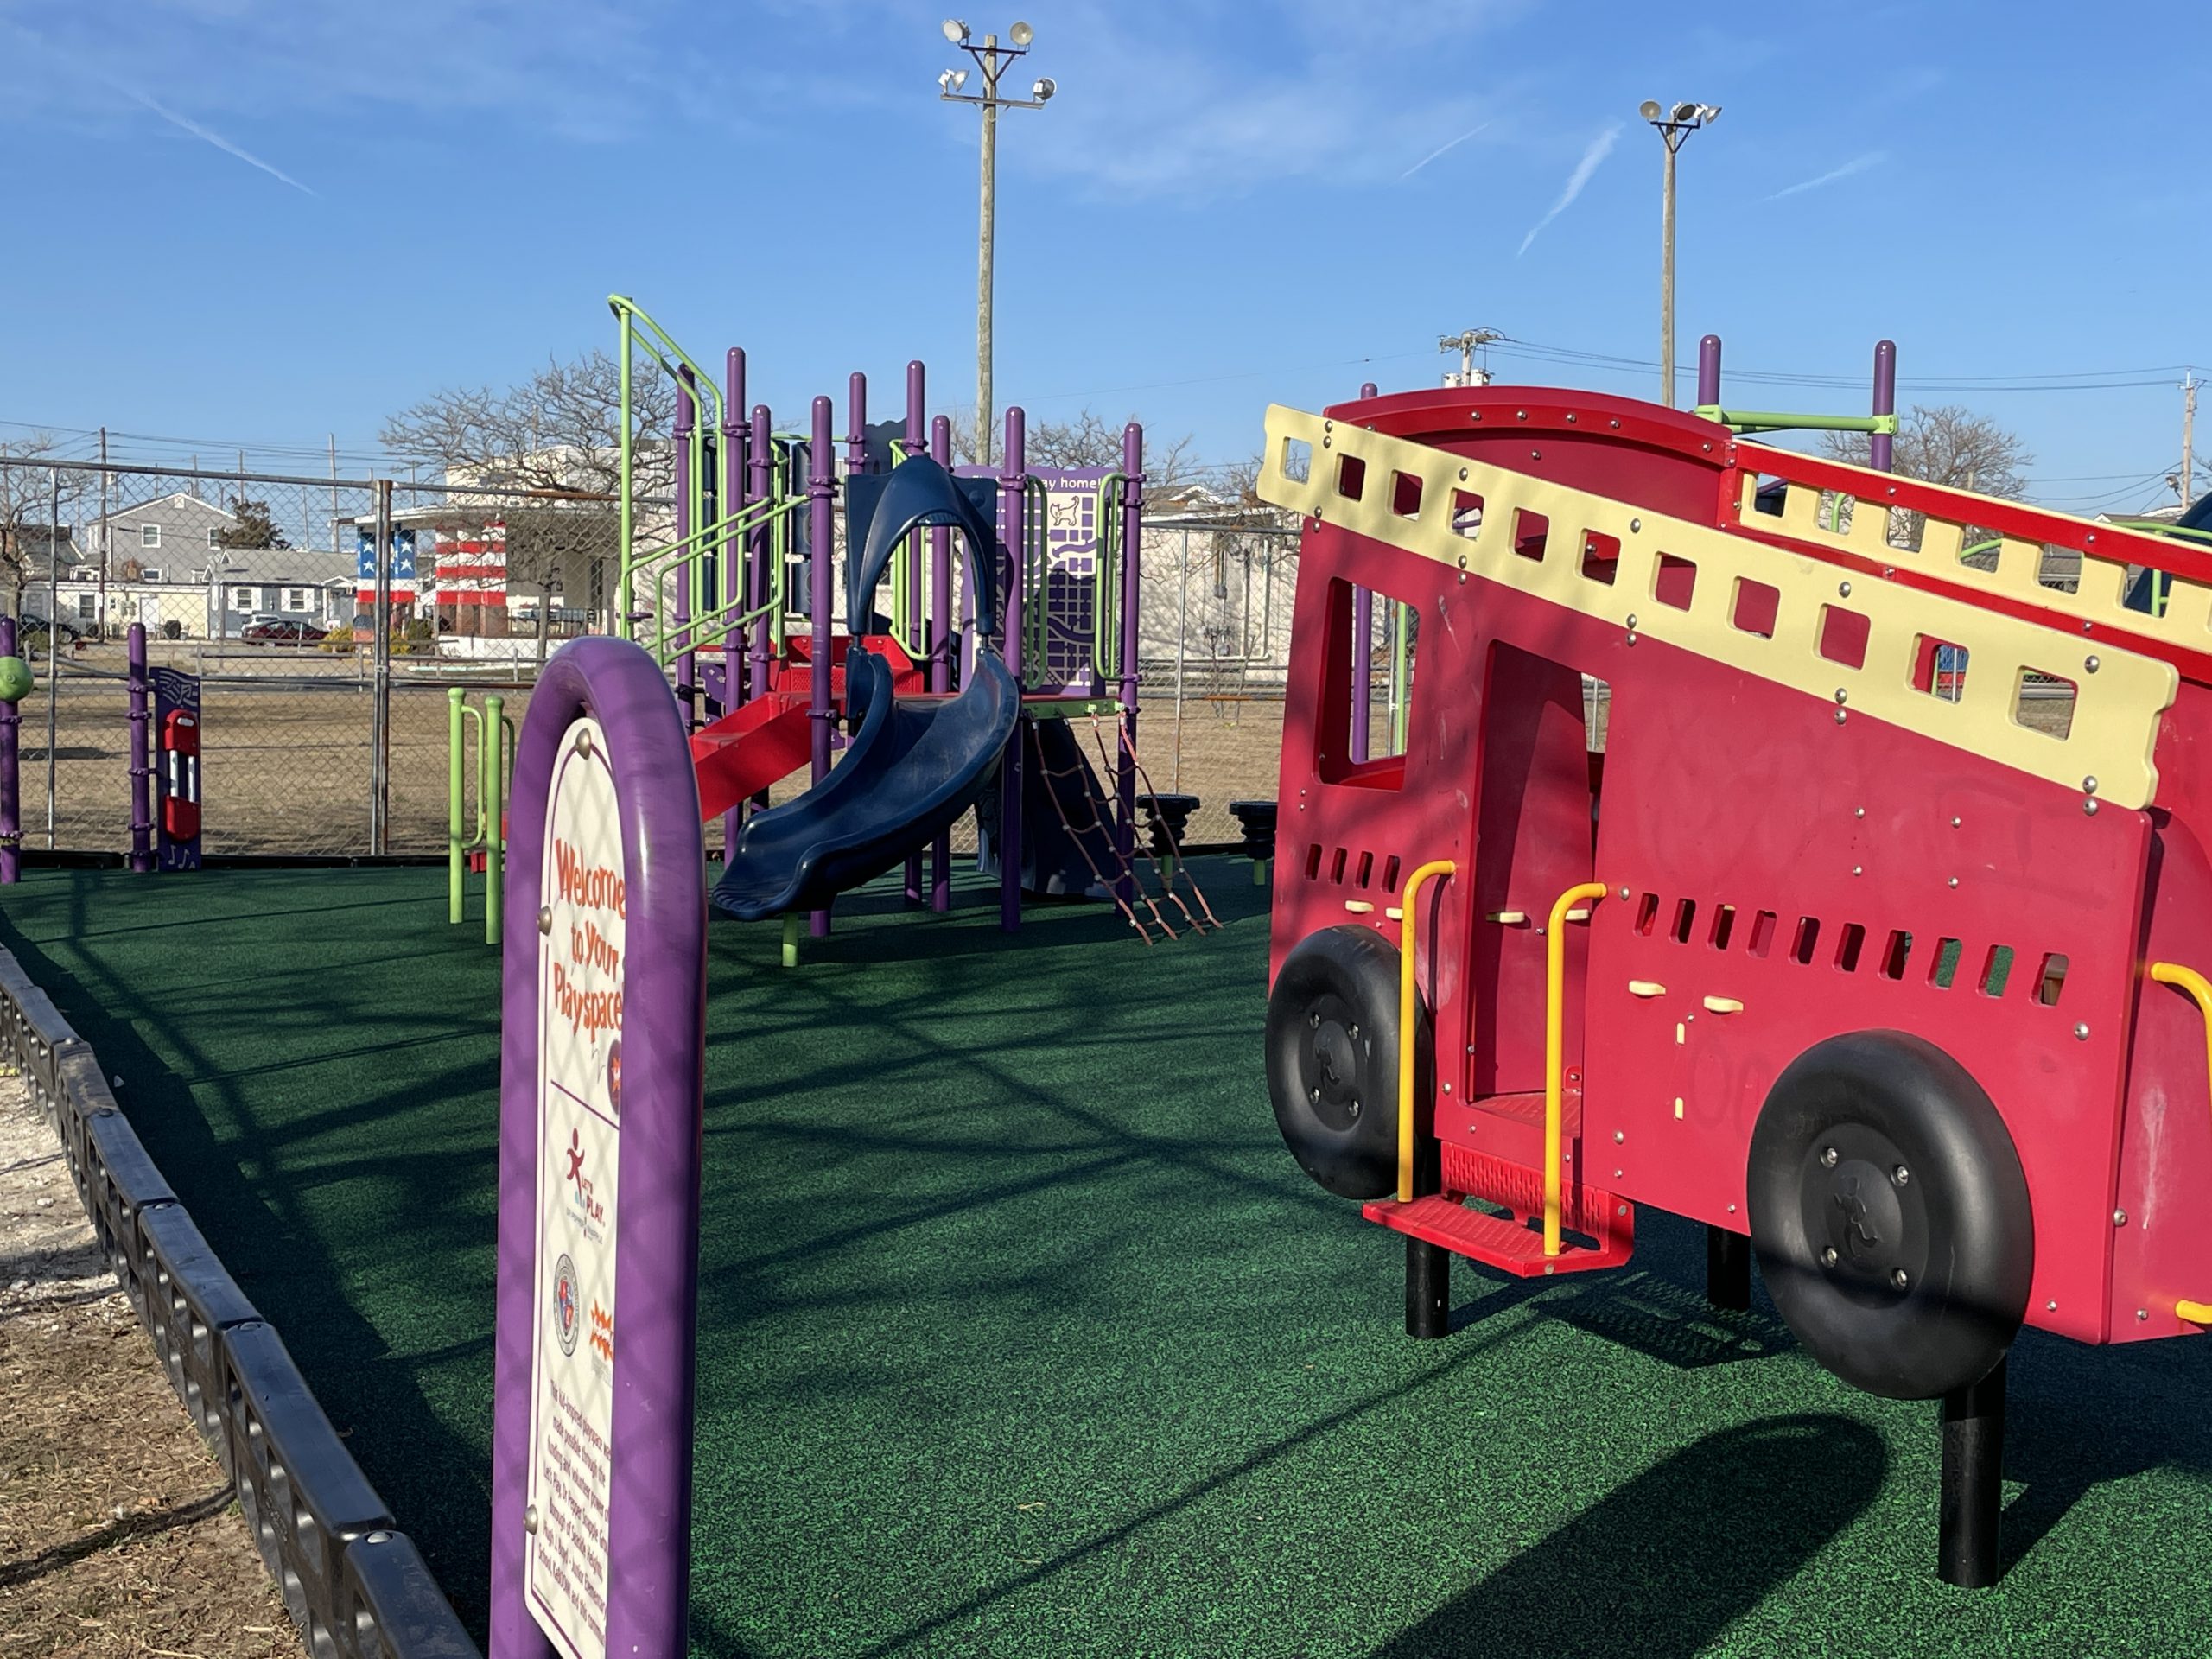 The new playground at Hugh J. Boyd Elementary School in Seaside Heights, March 2021. (Photo: Daniel Nee)